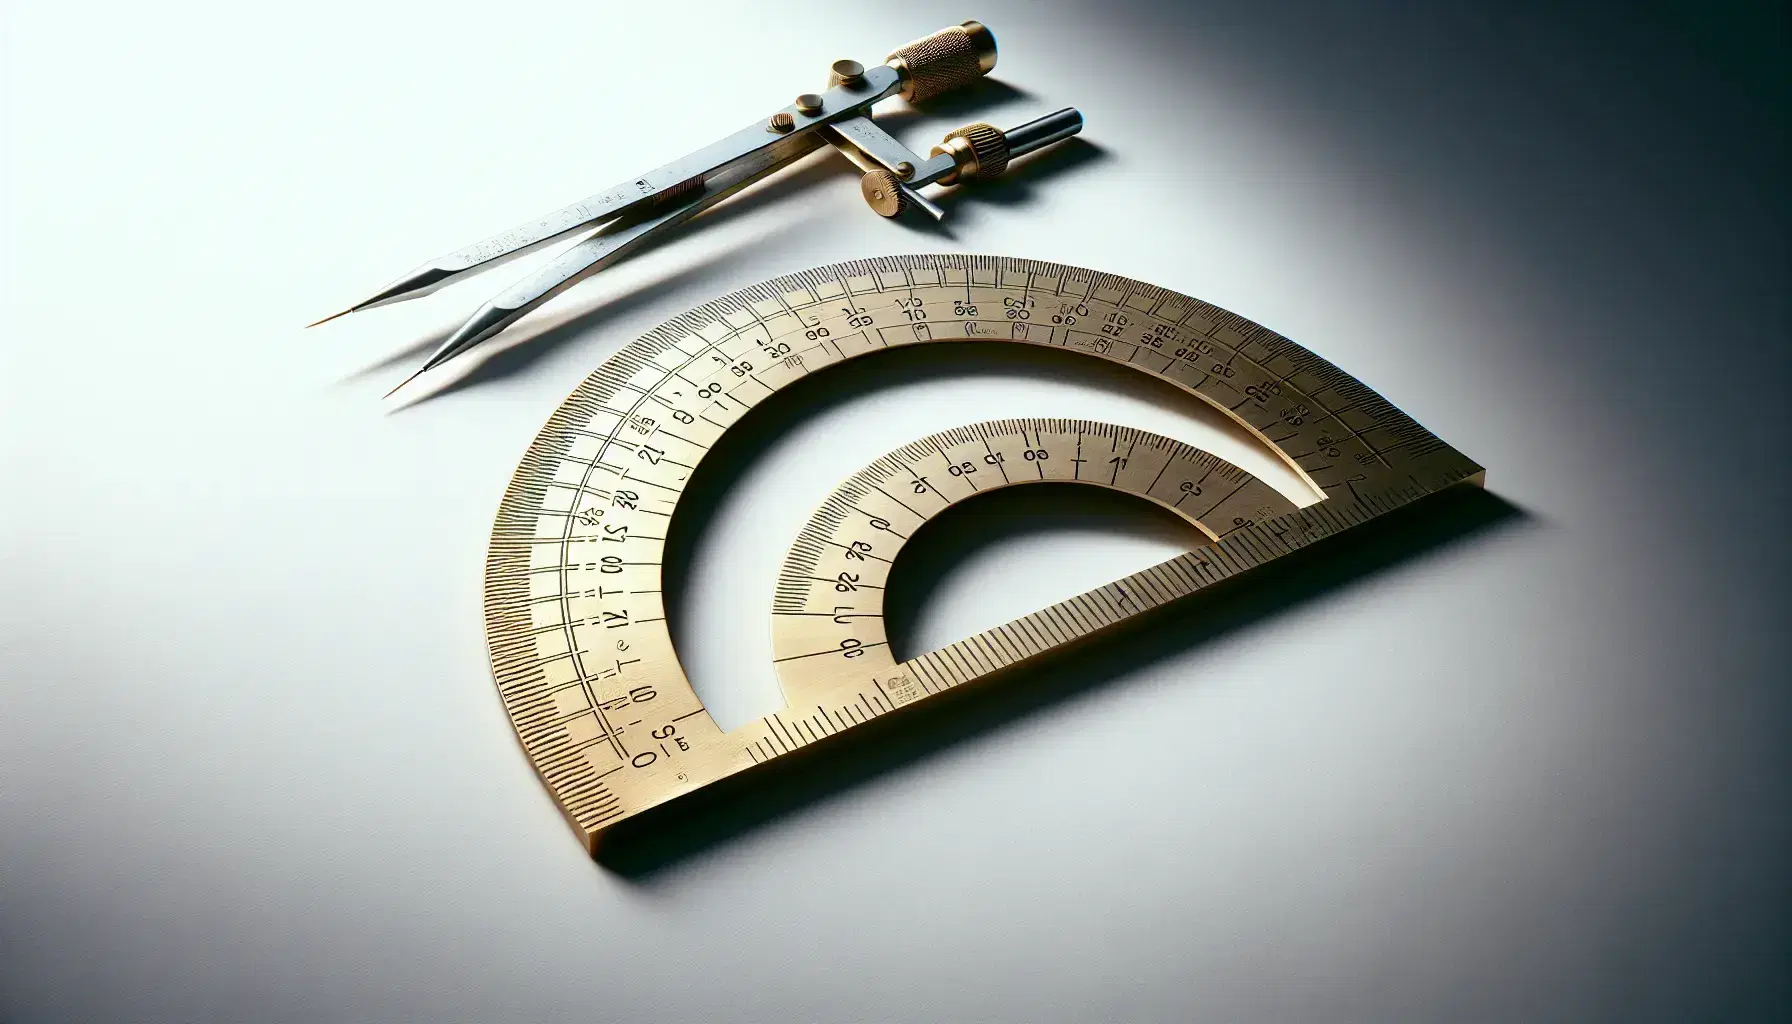 Brass semicircular protractor with etched degree marks and straight edge alongside metallic compass with pencil tip on white background, casting soft shadows.